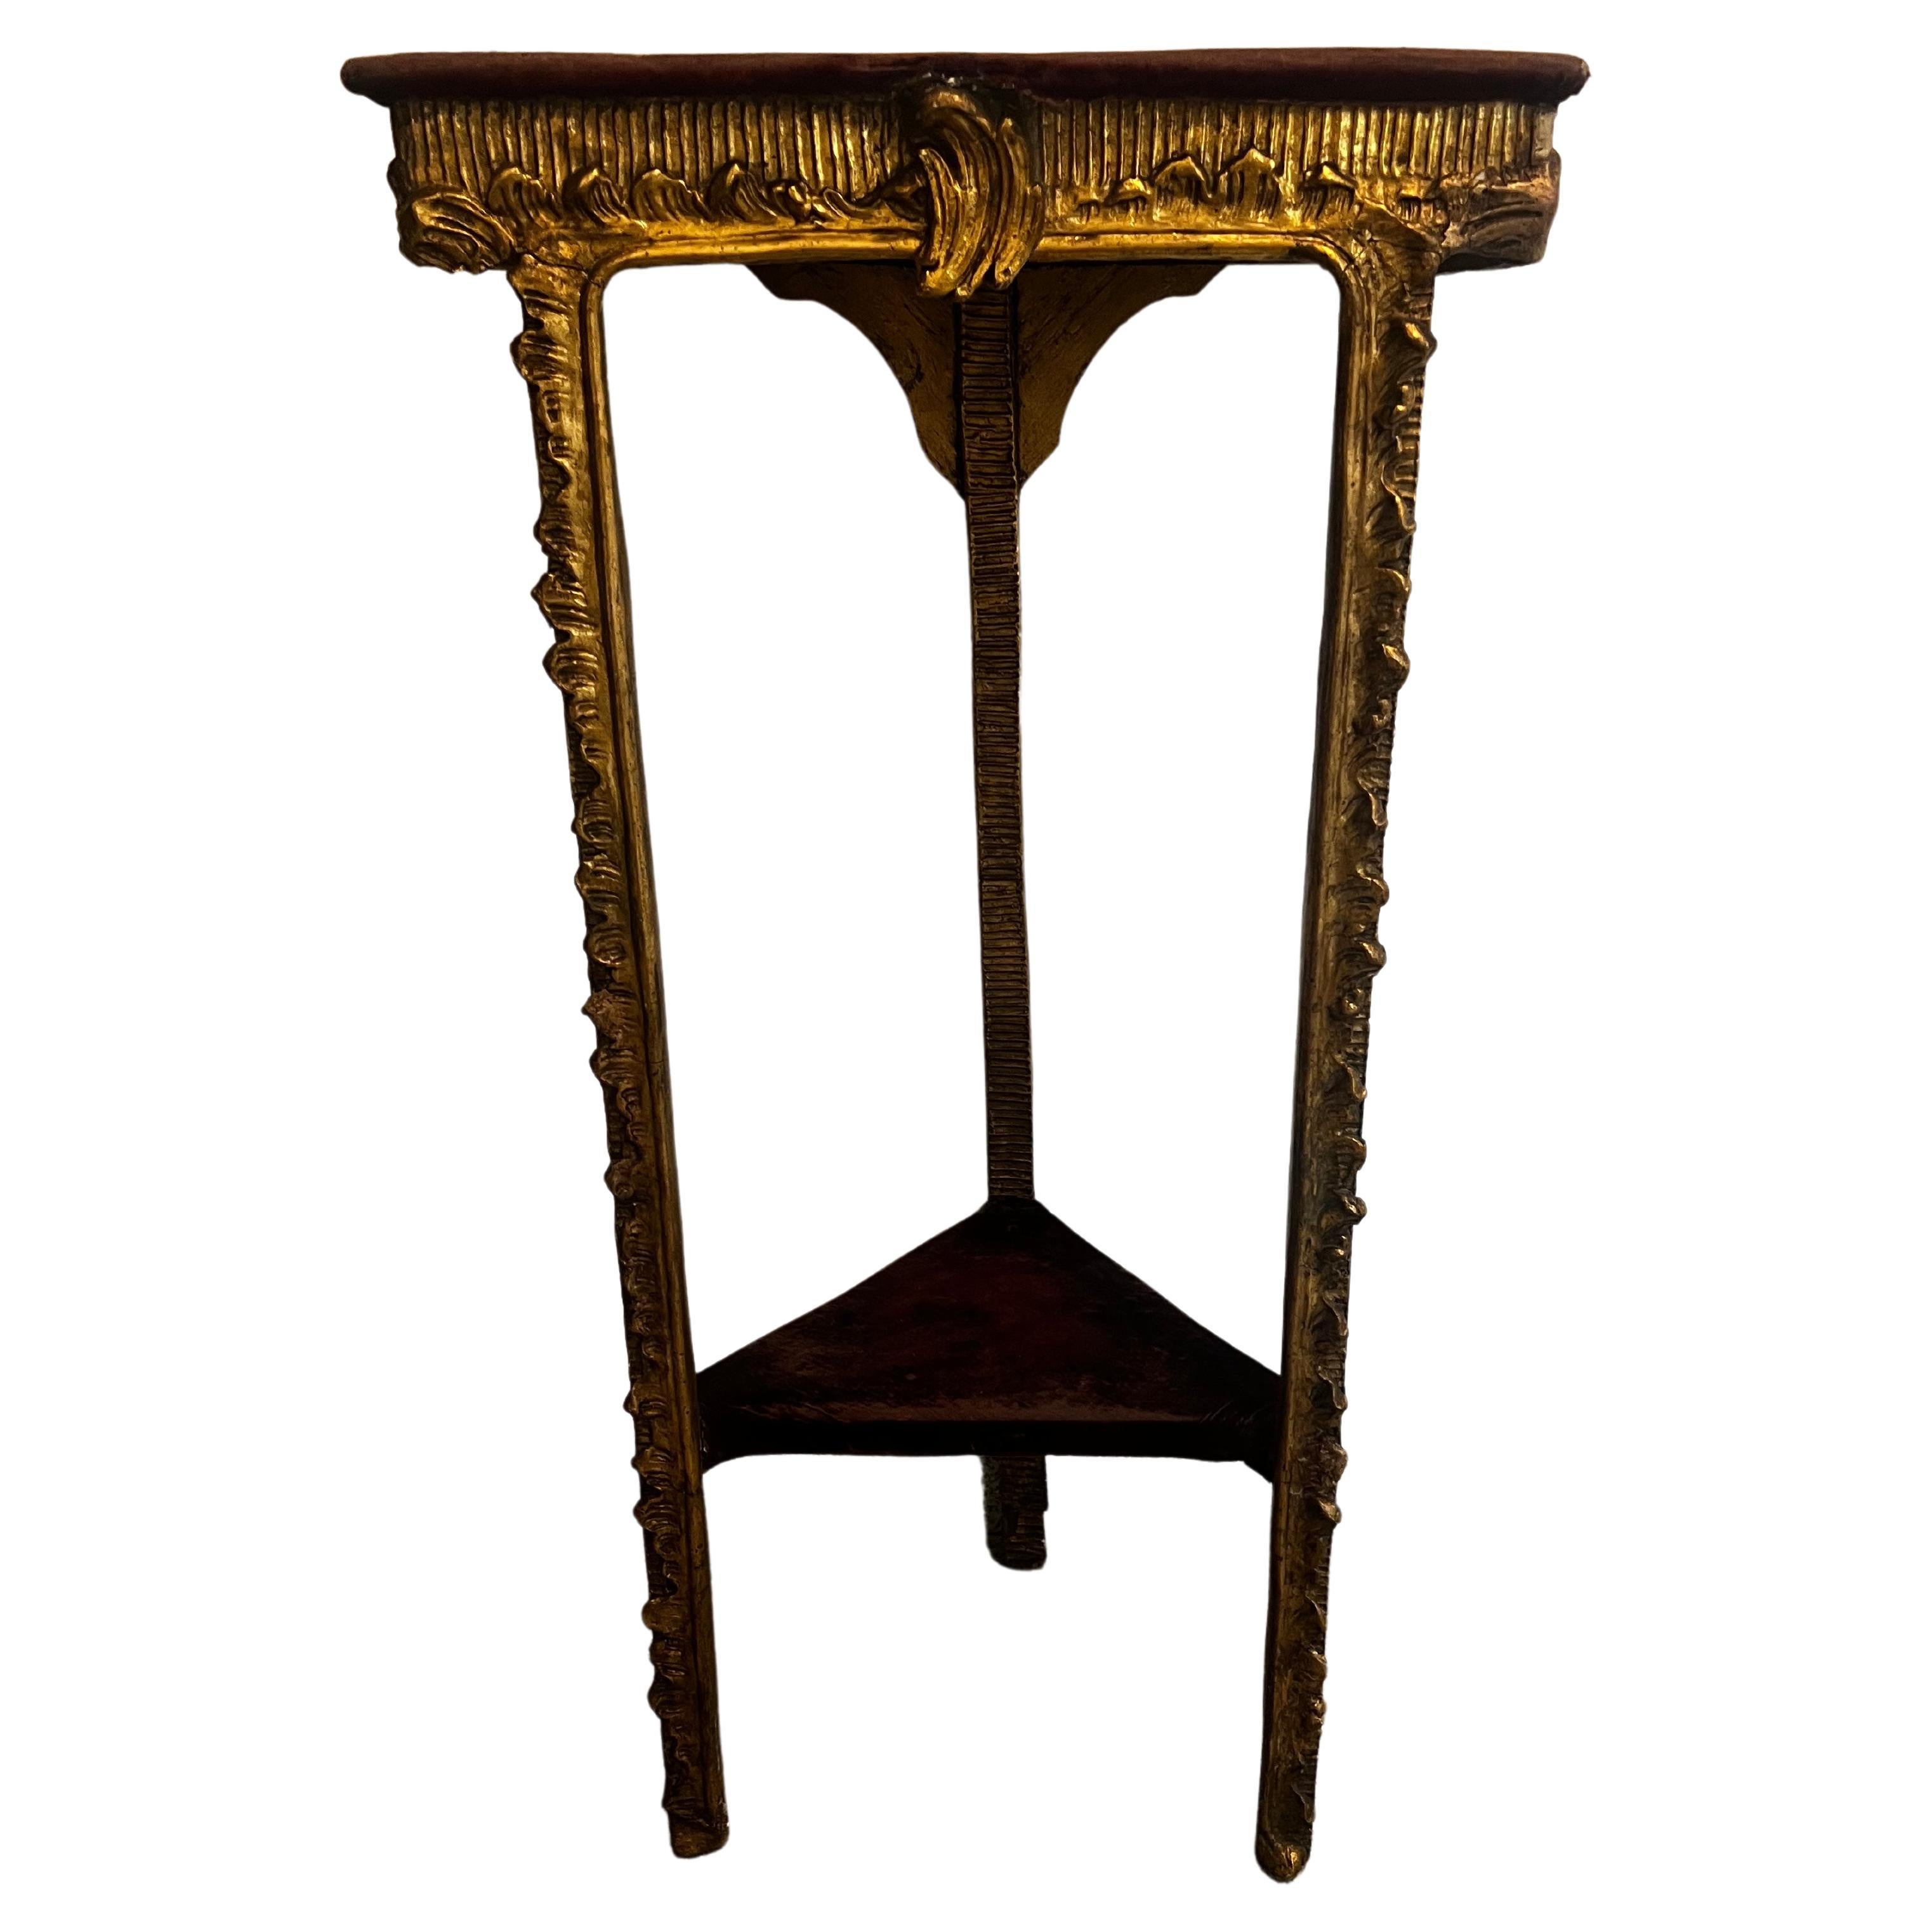 Rare Antique Venetian 18th Century Gold Gilded Console Table For Sale